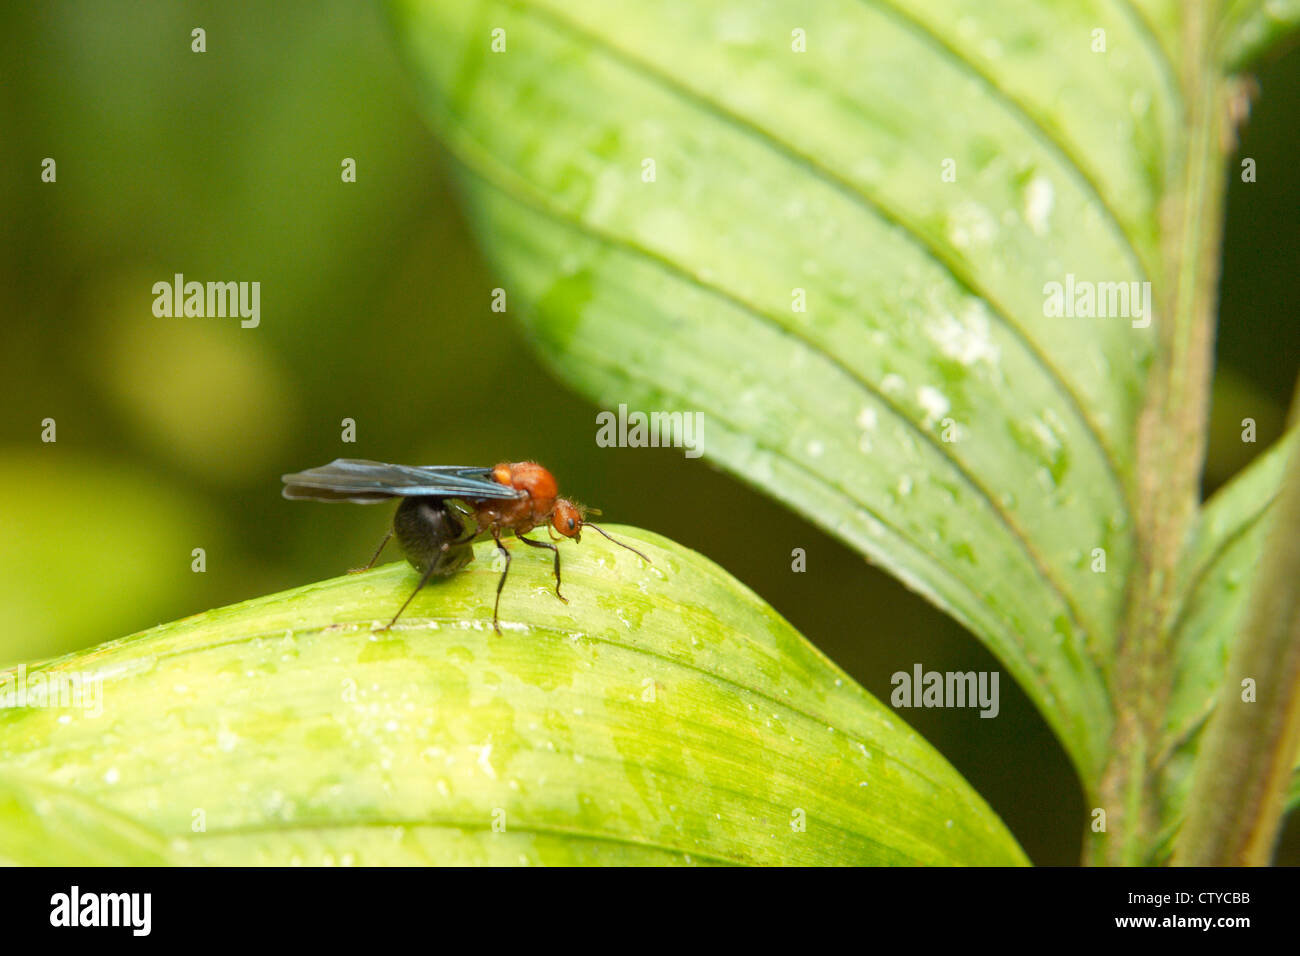 tropical ant or wasp on a leaf Stock Photo